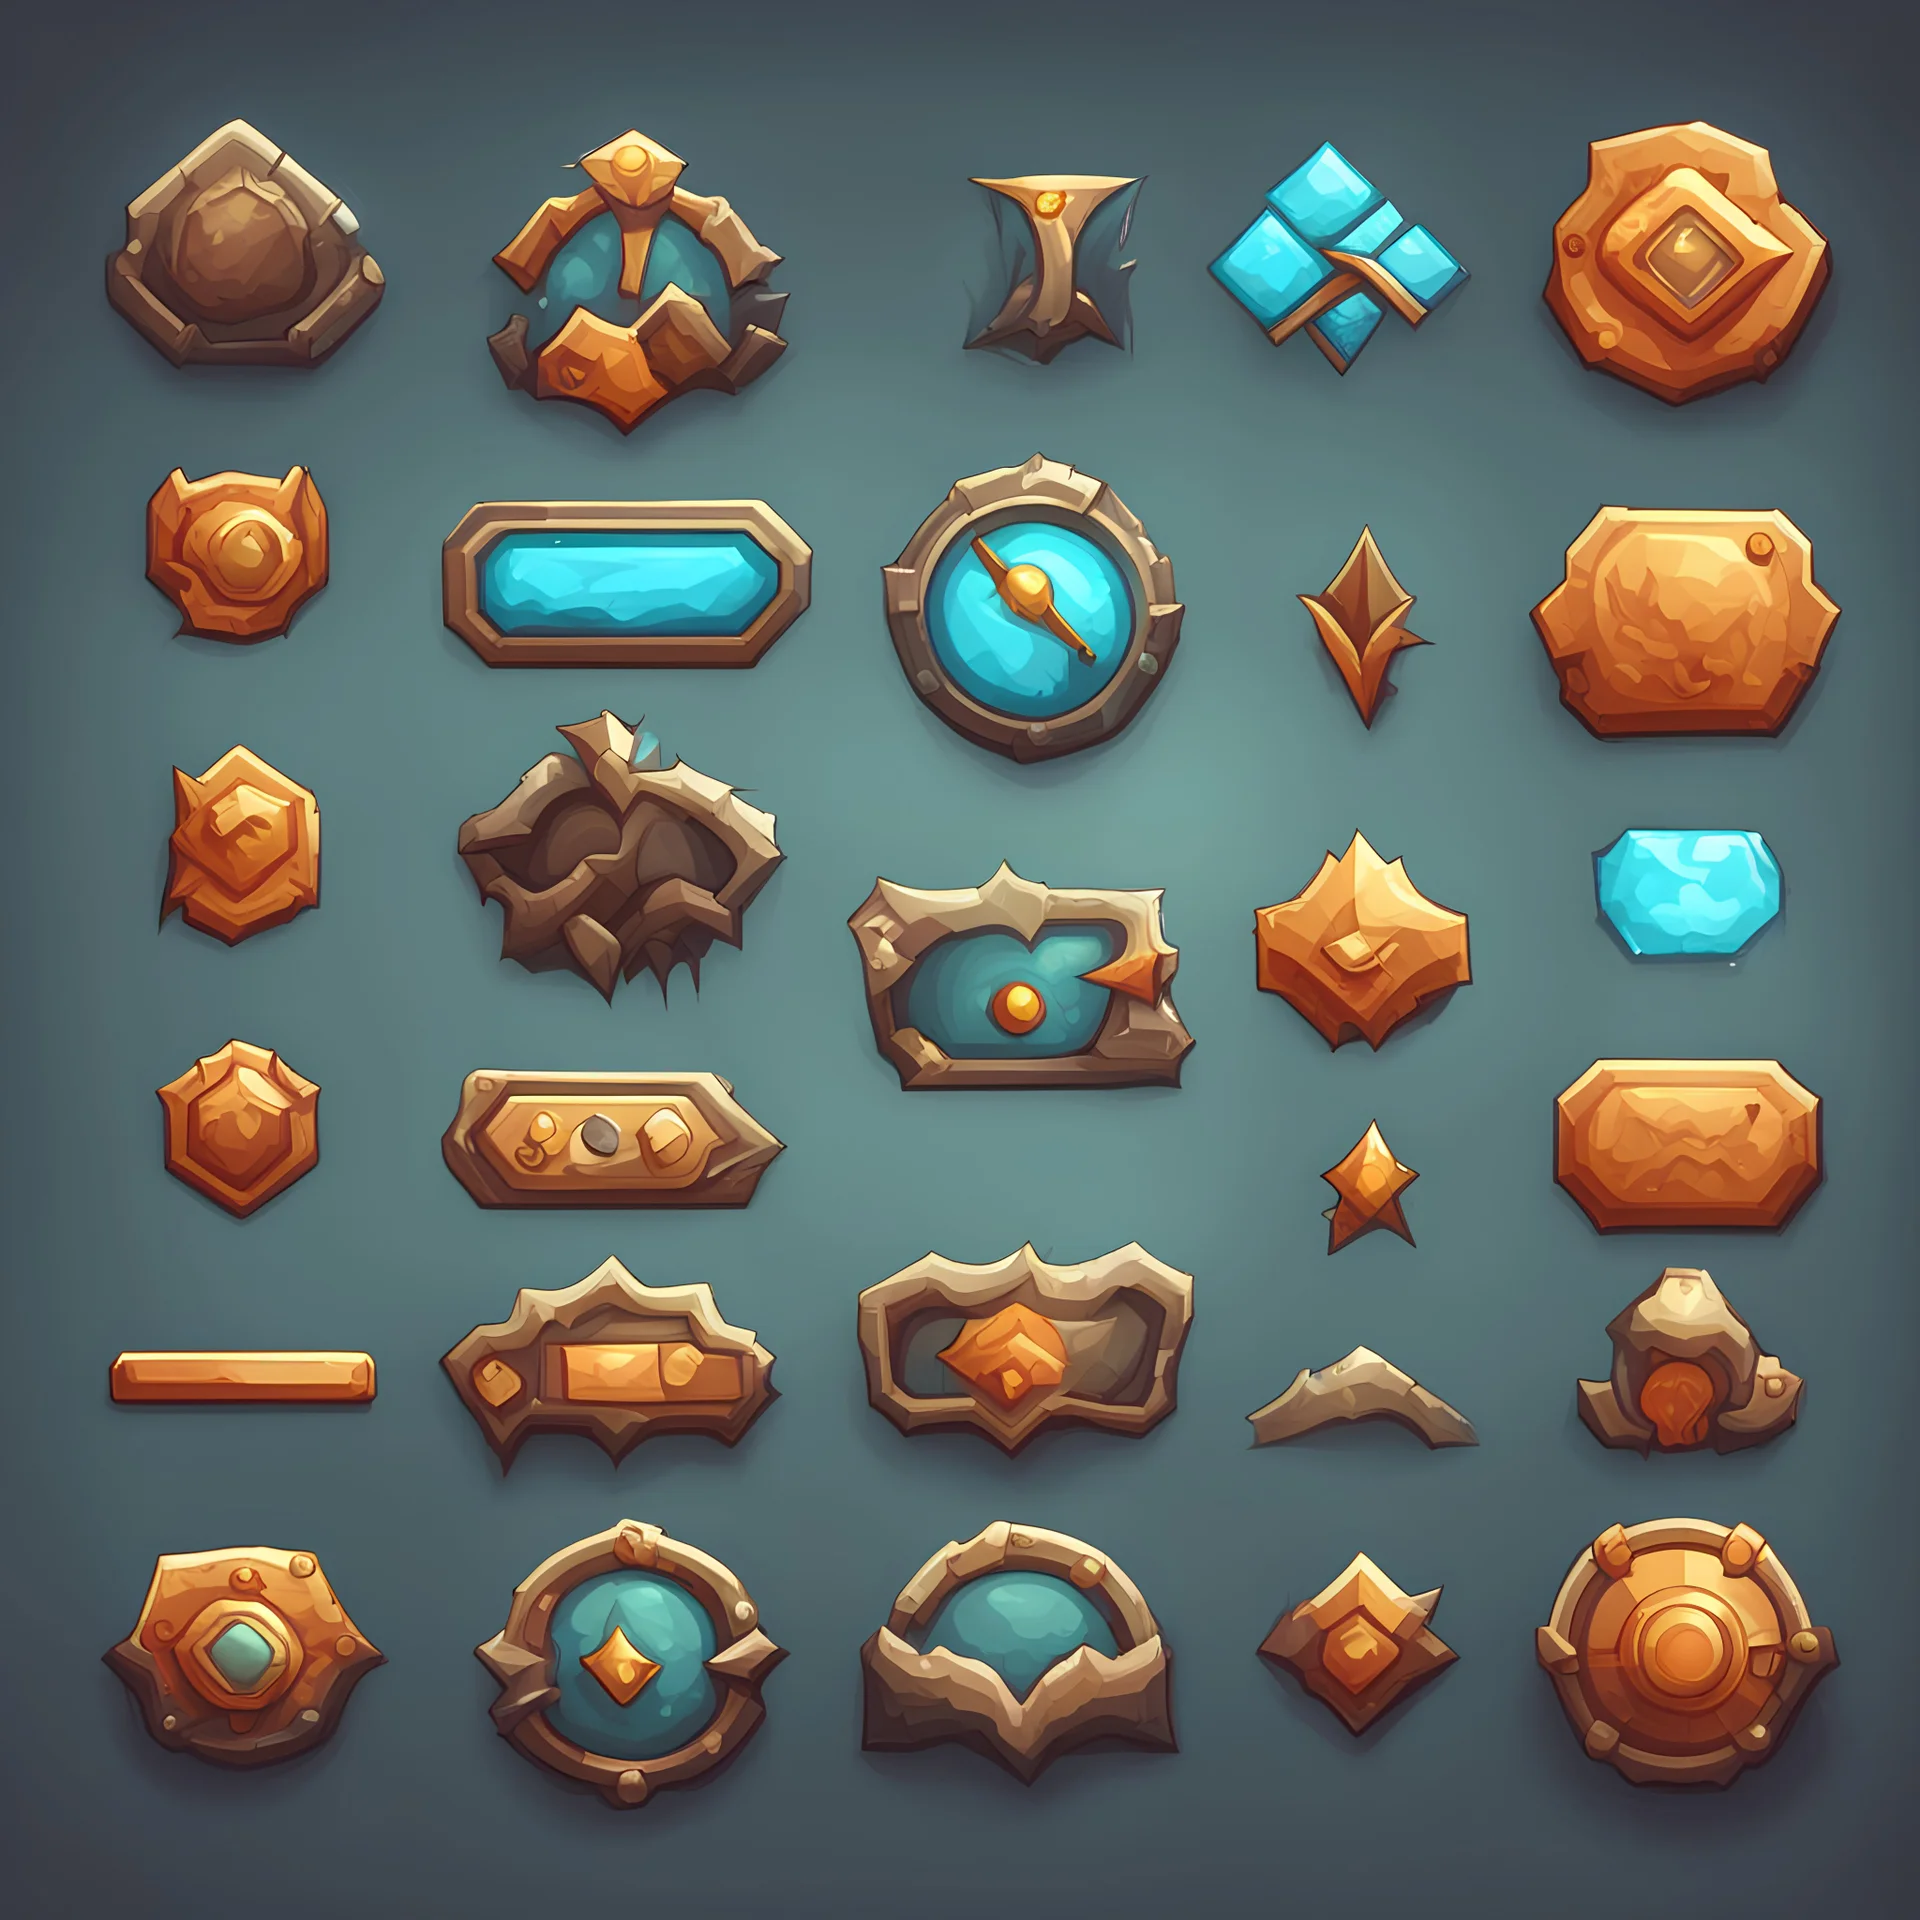 Ui elements for a game.